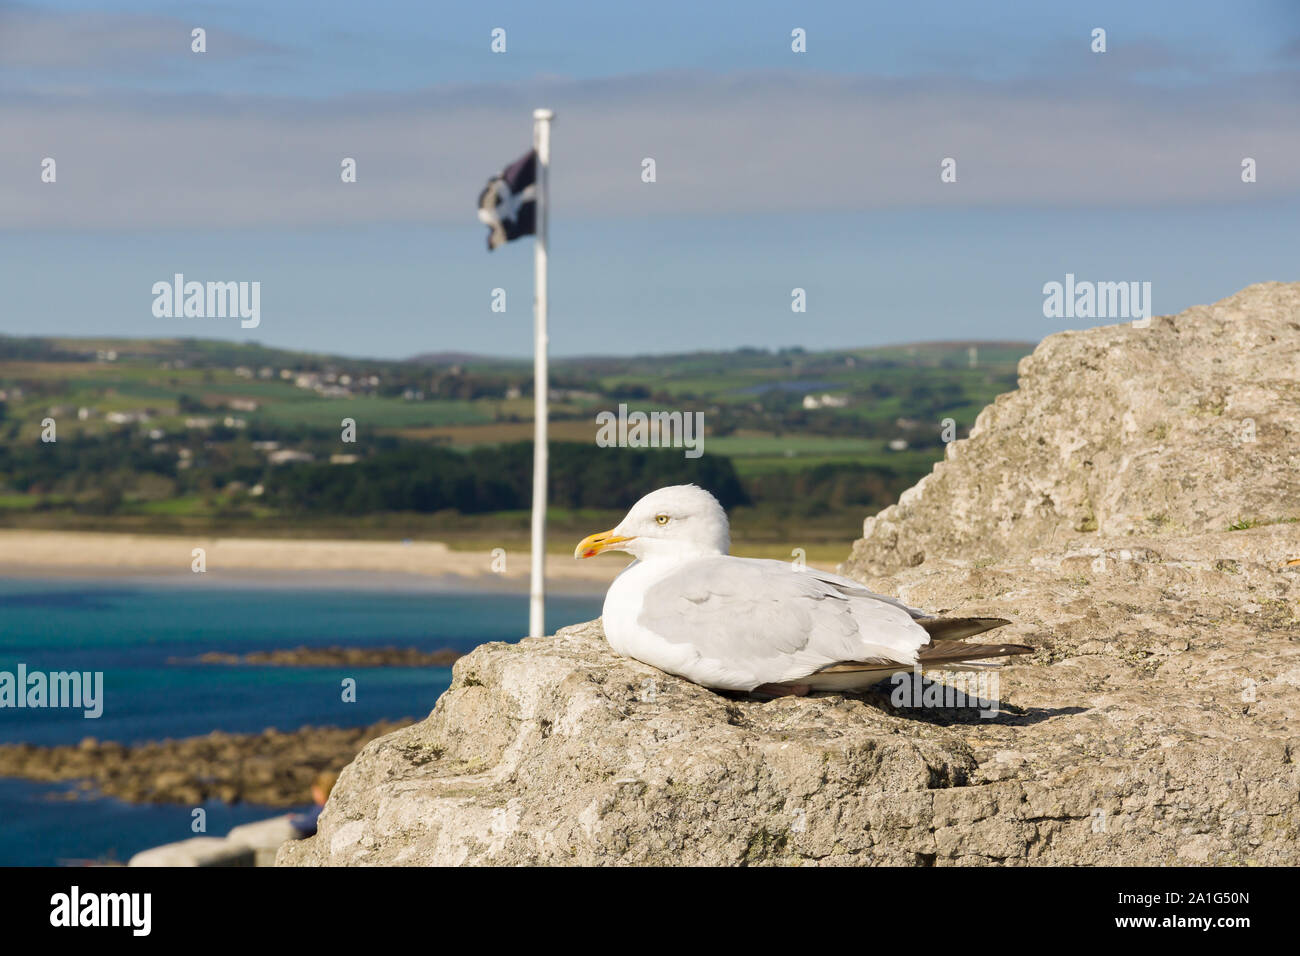 European herring gull latin name Larus argentatus roosting among rocks at Mounts Bay in Cornwall with a Cornish flag and landscape in the background Stock Photo